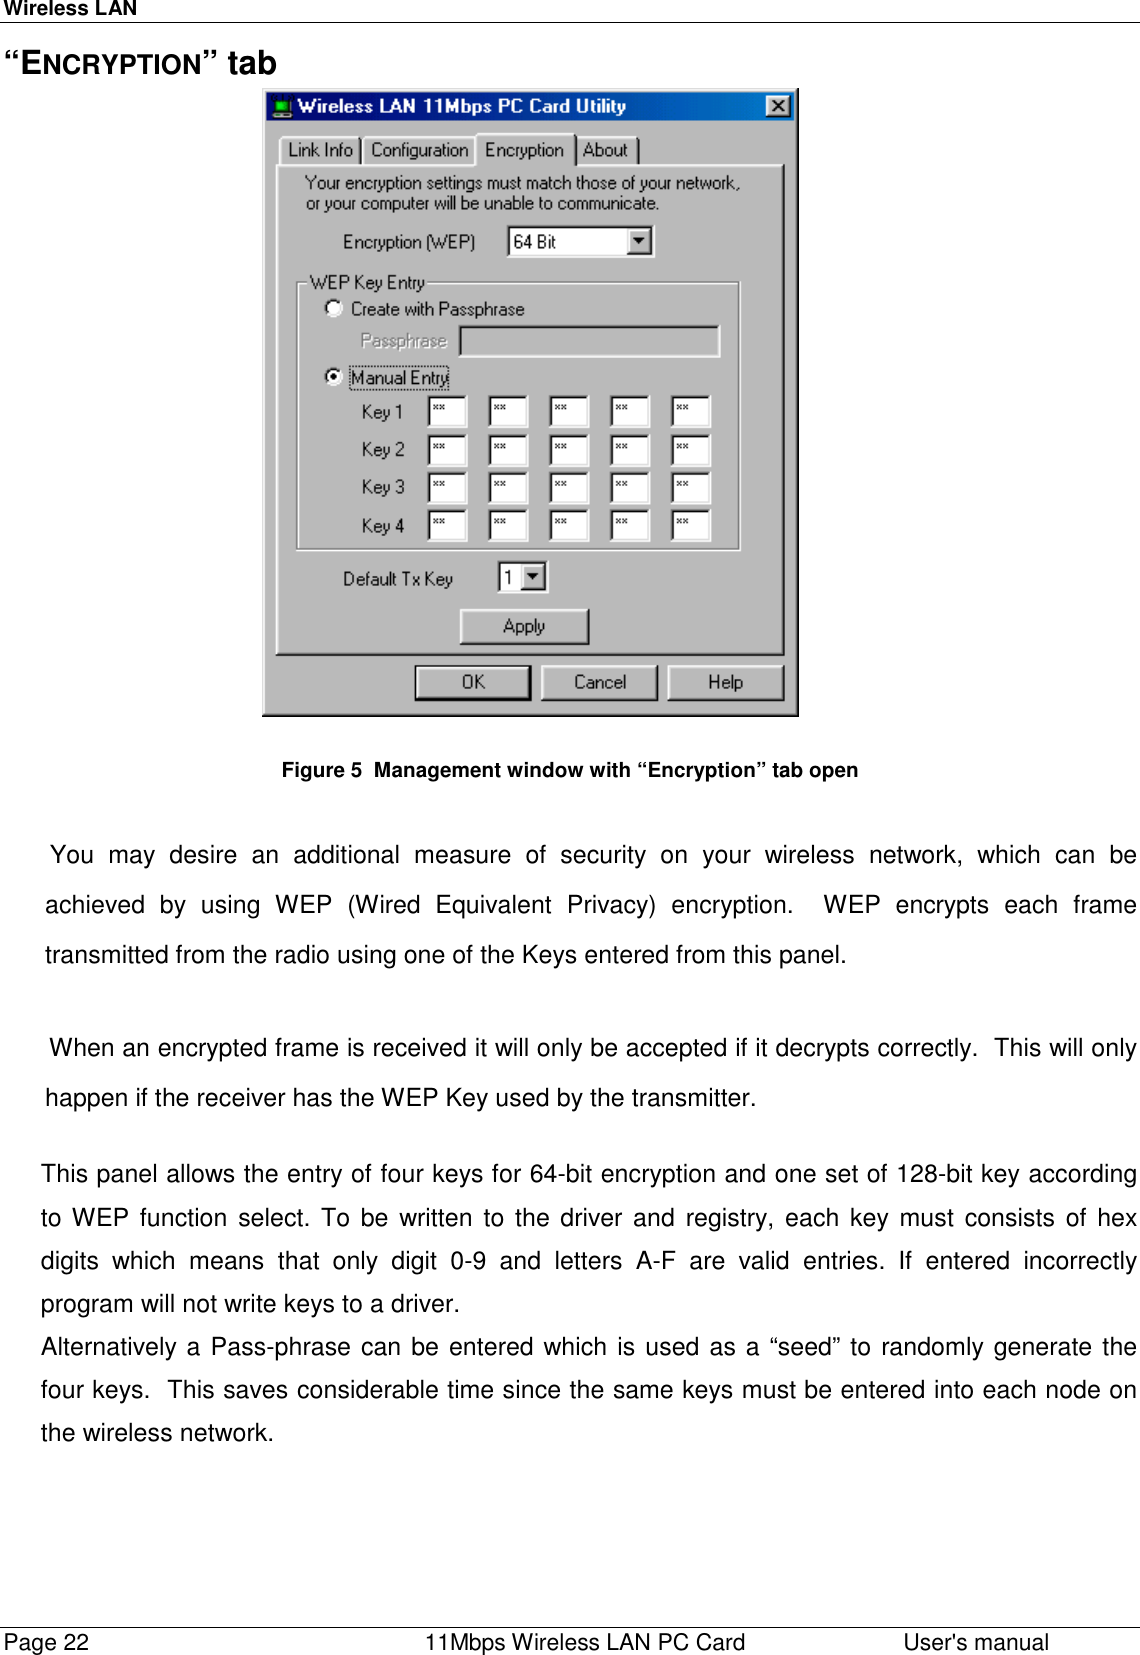 Wireless LANPage 22    11Mbps Wireless LAN PC Card User&apos;s manual“ENCRYPTION” tab                                                        Figure 5  Management window with “Encryption” tab open You may desire an additional measure of security on your wireless network, which can beachieved by using WEP (Wired Equivalent Privacy) encryption.  WEP encrypts each frametransmitted from the radio using one of the Keys entered from this panel.When an encrypted frame is received it will only be accepted if it decrypts correctly.  This will onlyhappen if the receiver has the WEP Key used by the transmitter.This panel allows the entry of four keys for 64-bit encryption and one set of 128-bit key accordingto WEP function select. To be written to the driver and registry, each key must consists of hexdigits which means that only digit 0-9 and letters A-F are valid entries. If entered incorrectlyprogram will not write keys to a driver.Alternatively a Pass-phrase can be entered which is used as a “seed” to randomly generate thefour keys.  This saves considerable time since the same keys must be entered into each node onthe wireless network.